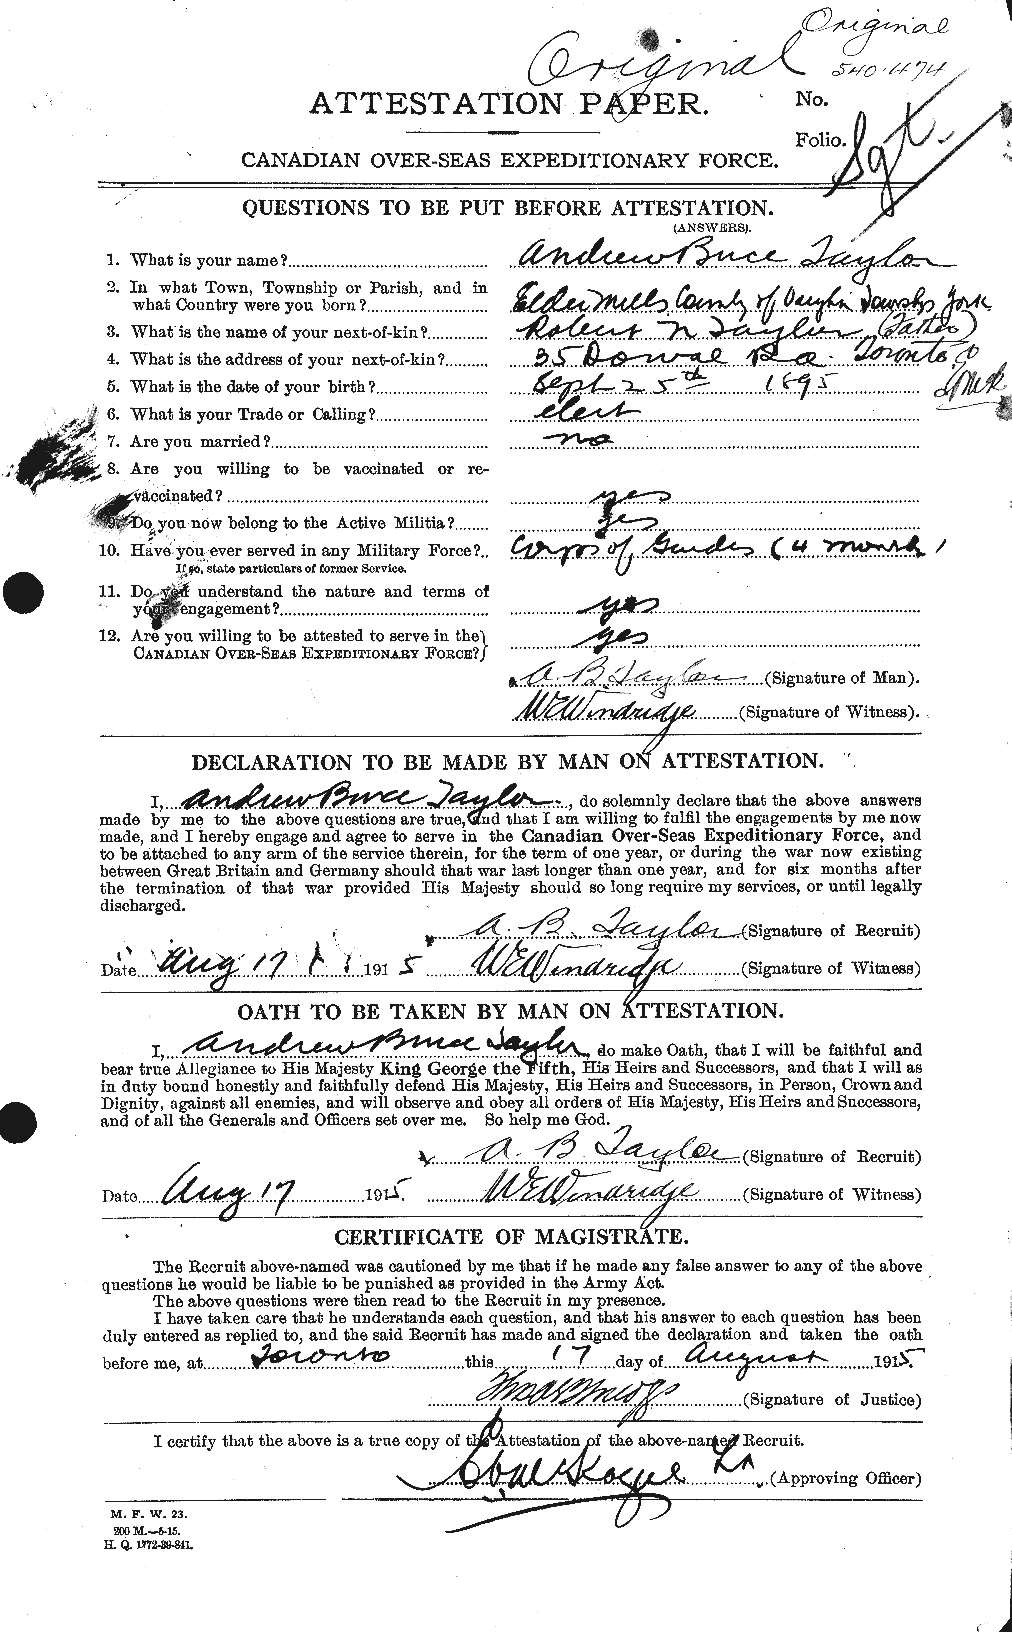 Personnel Records of the First World War - CEF 626228a